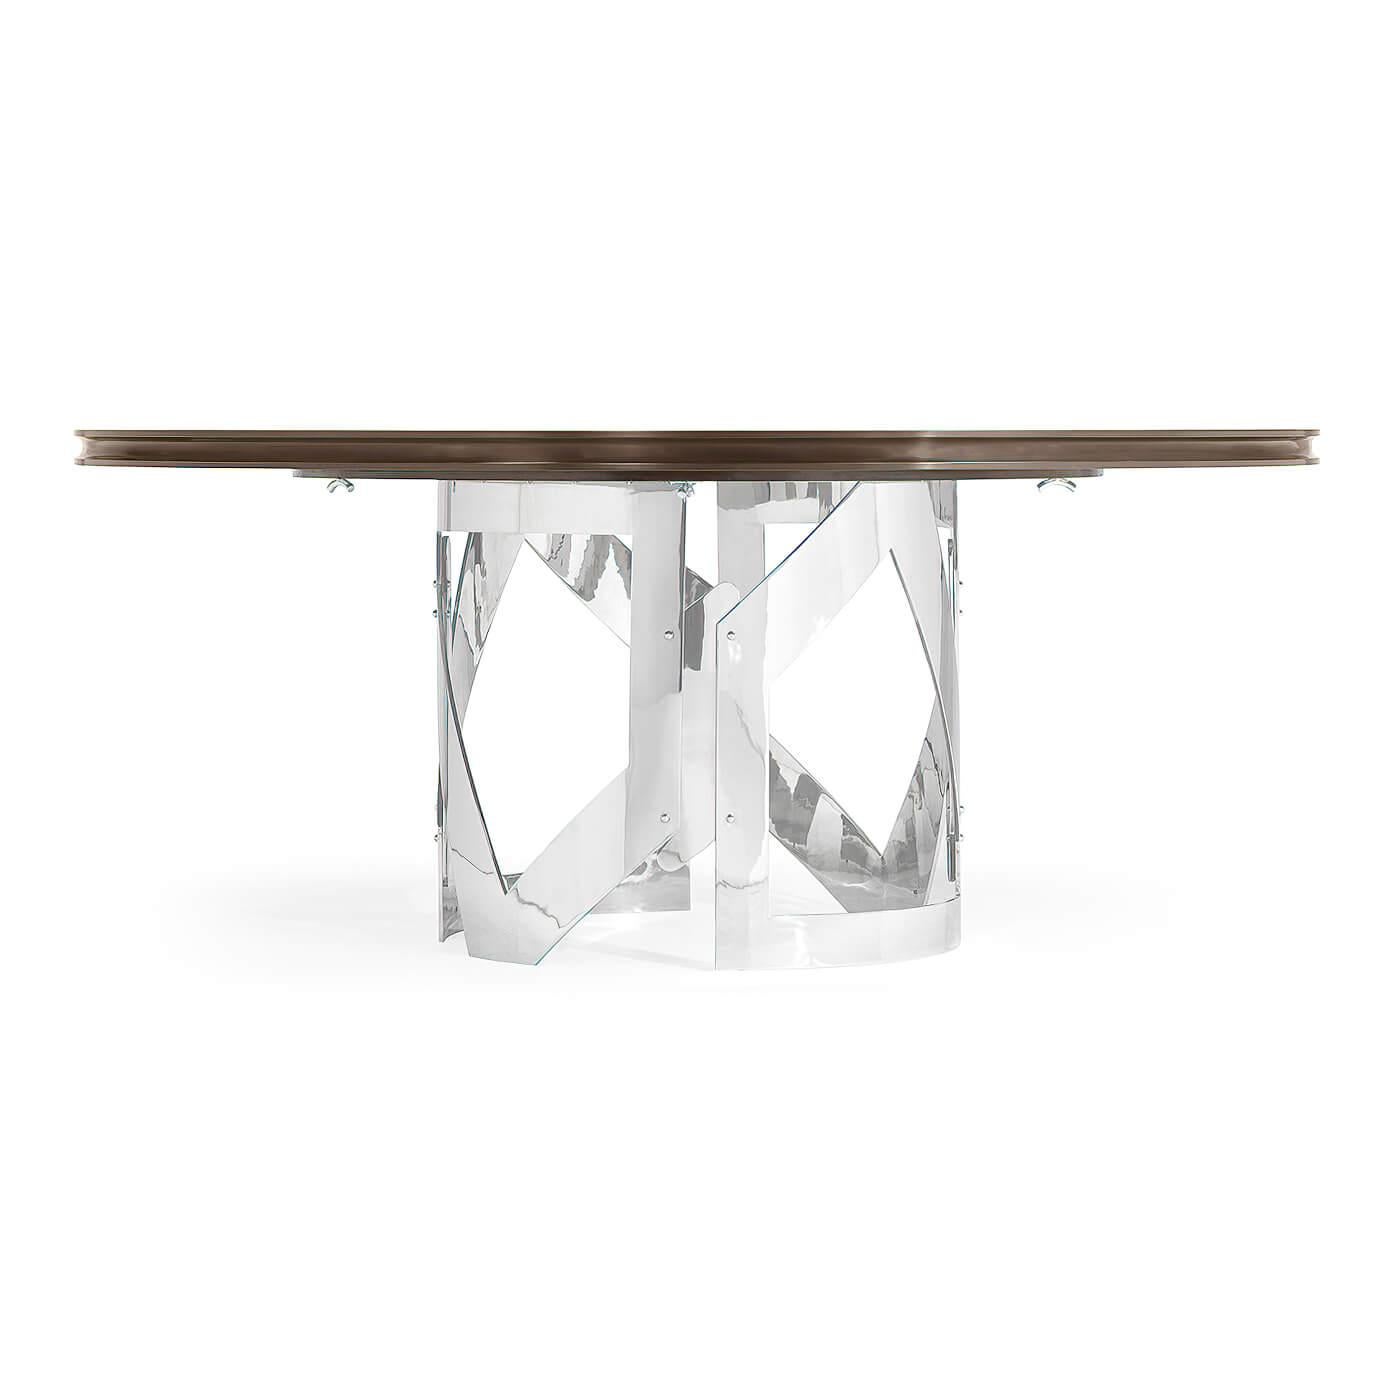 An Art Deco-inspired round dining table with an unusual Eucalyptus veneered top raised on an unusual openwork stainless steel column base. 

Dimensions: 60